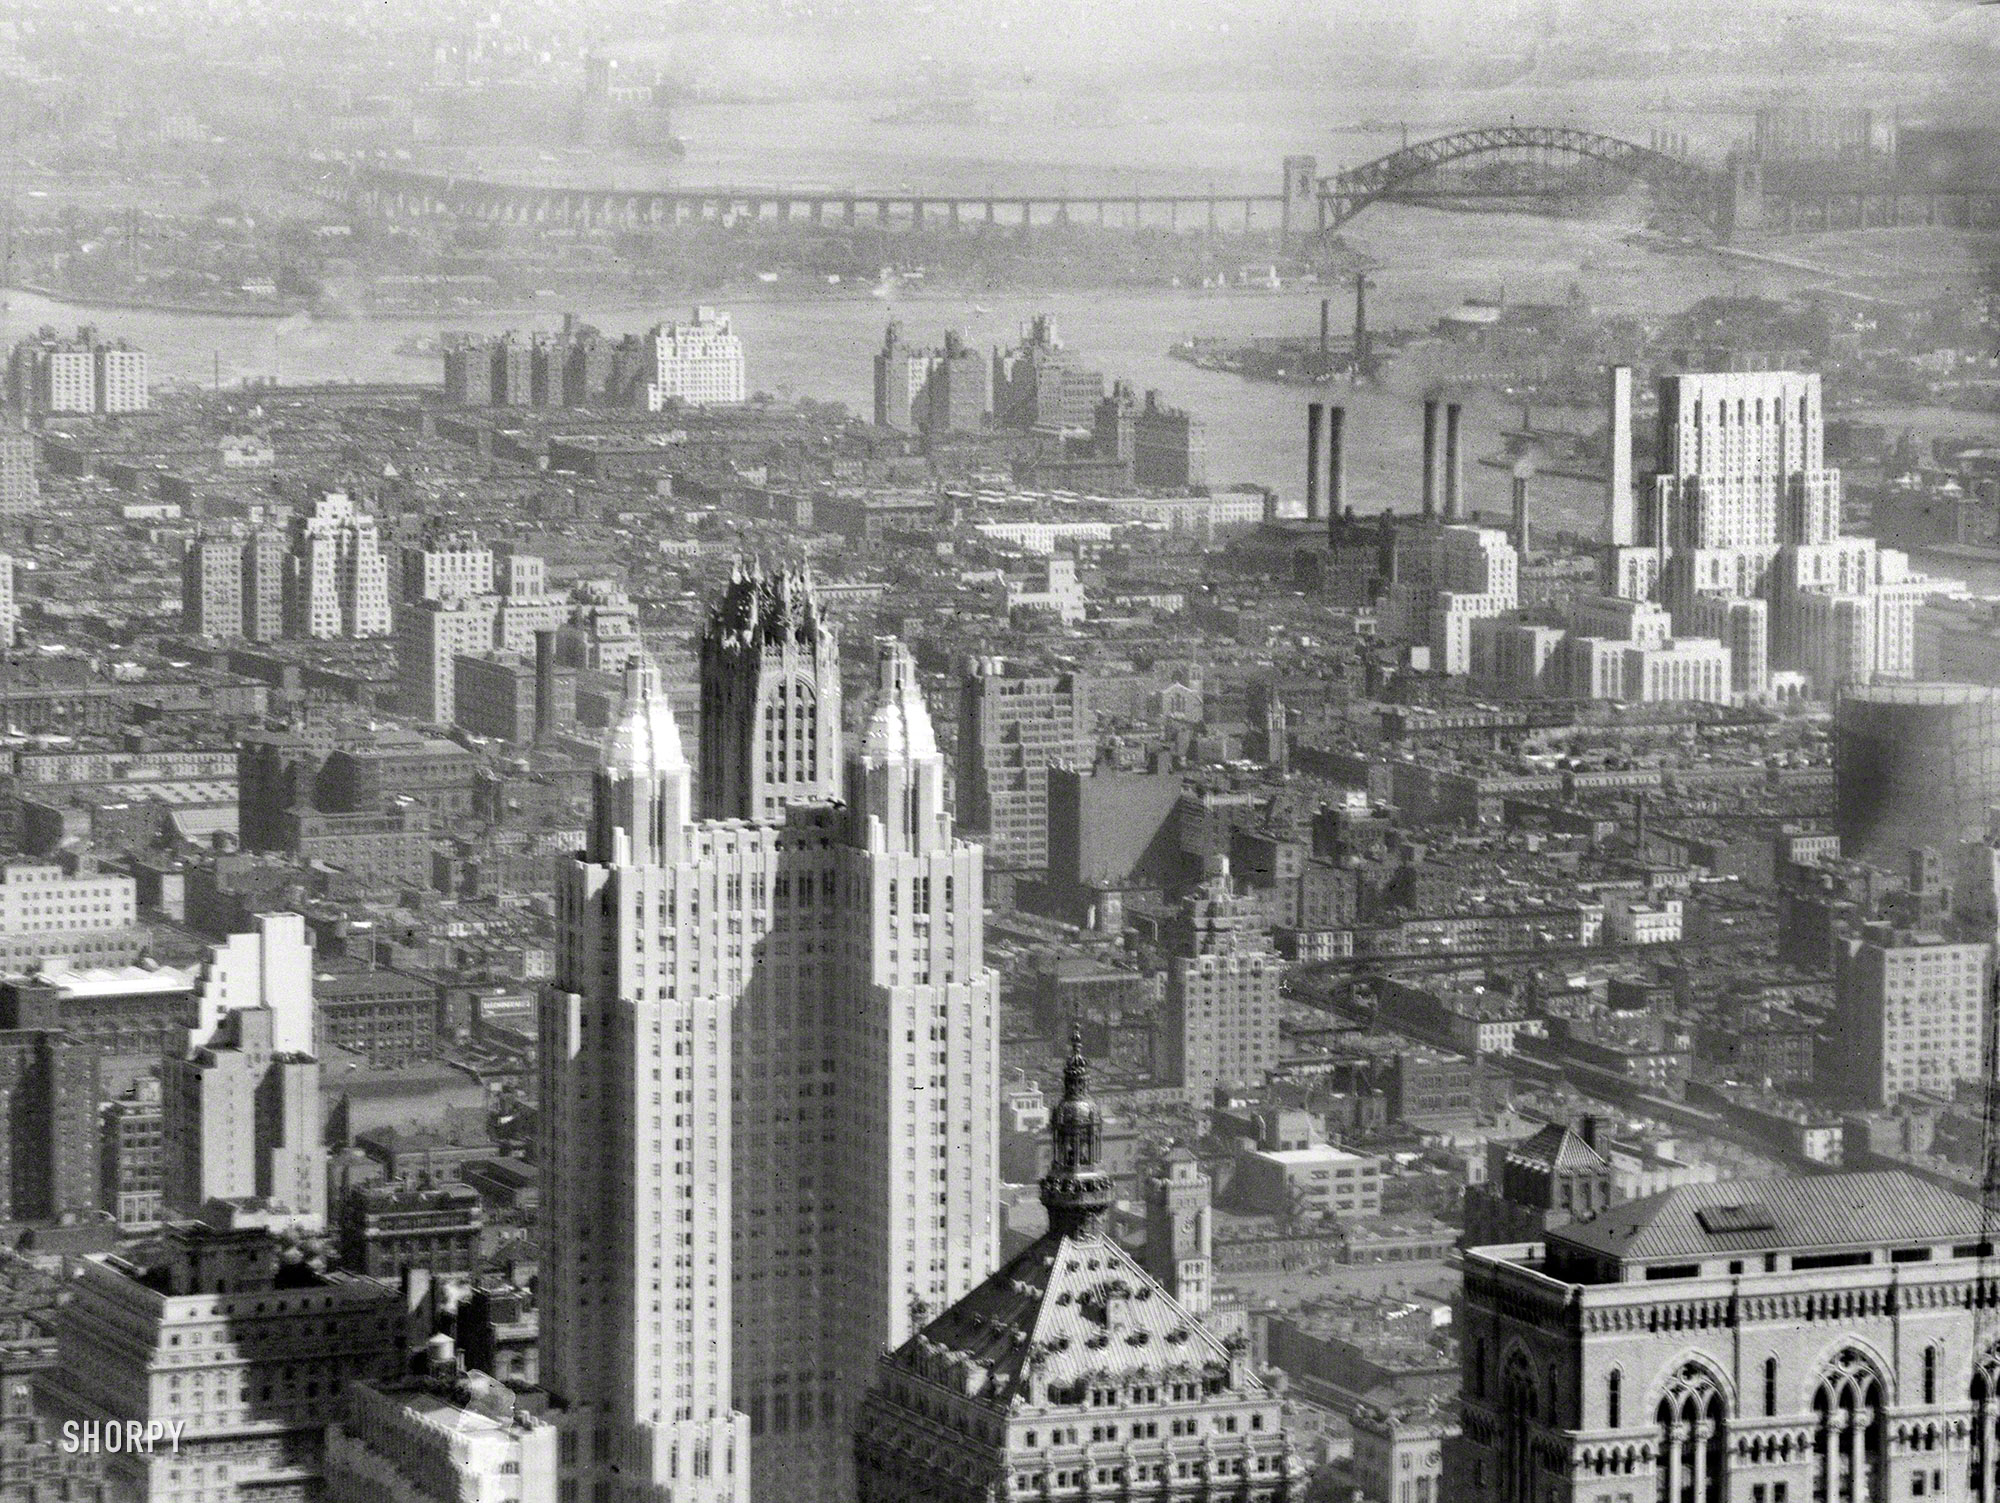 A view over 1930s Manhattan showing the Hell Gate Bridge across the East River in the distance, the Waldorf-Astoria towers and 230 Park Avenue (Helmsley Building) foreground, Lincoln Building lower right, and a gleaming New York Hospital on the right. 4x5 nitrate negative by Arnold Genthe. View full size.